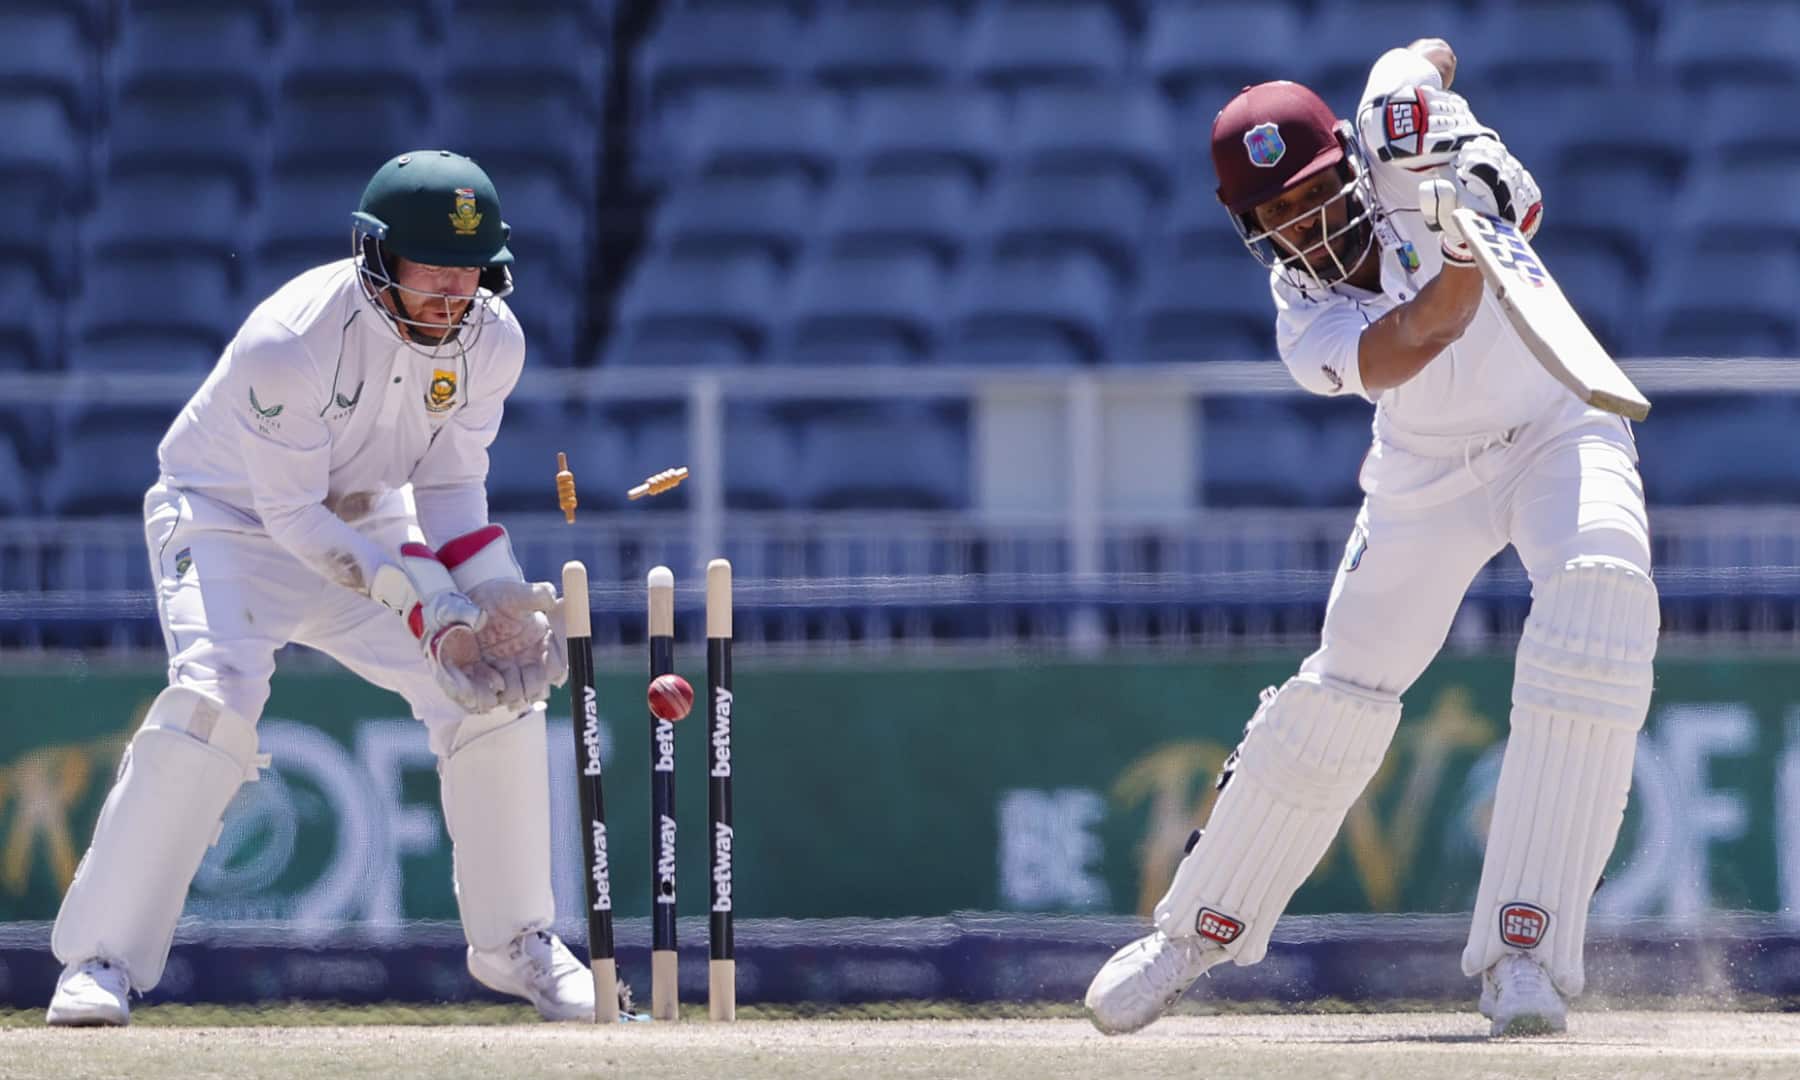 JOHANNESBURG: West Indies’ Roston Chase (R) is bowled by South Africa’s Keshav Maharaj (not seen) as South Africa’s wicketkeeper Heinrich Klaasen (L) looks on during the fourth day of the second Test cricket match between South Africa and West Indies at The Wanderers Stadium in Johannesburg on March 11, 2023. — AFP